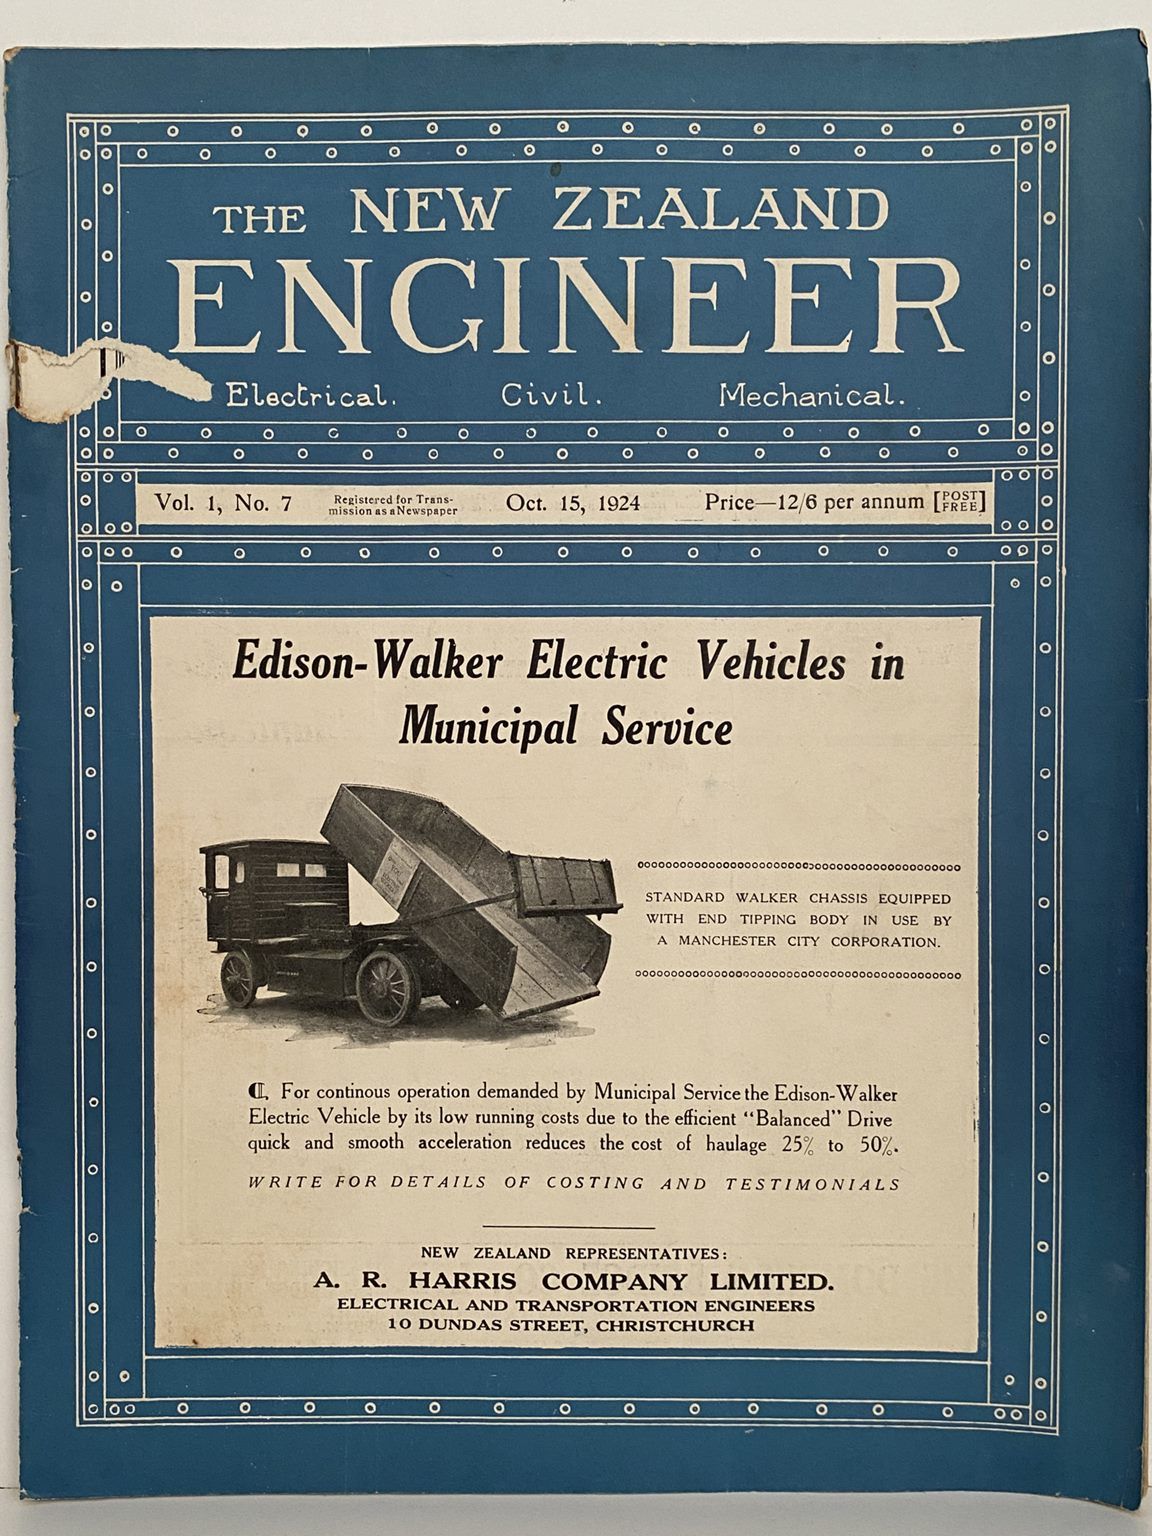 OLD MAGAZINE: The New Zealand Engineer Vol. 1, No. 7 - 15 October 1924